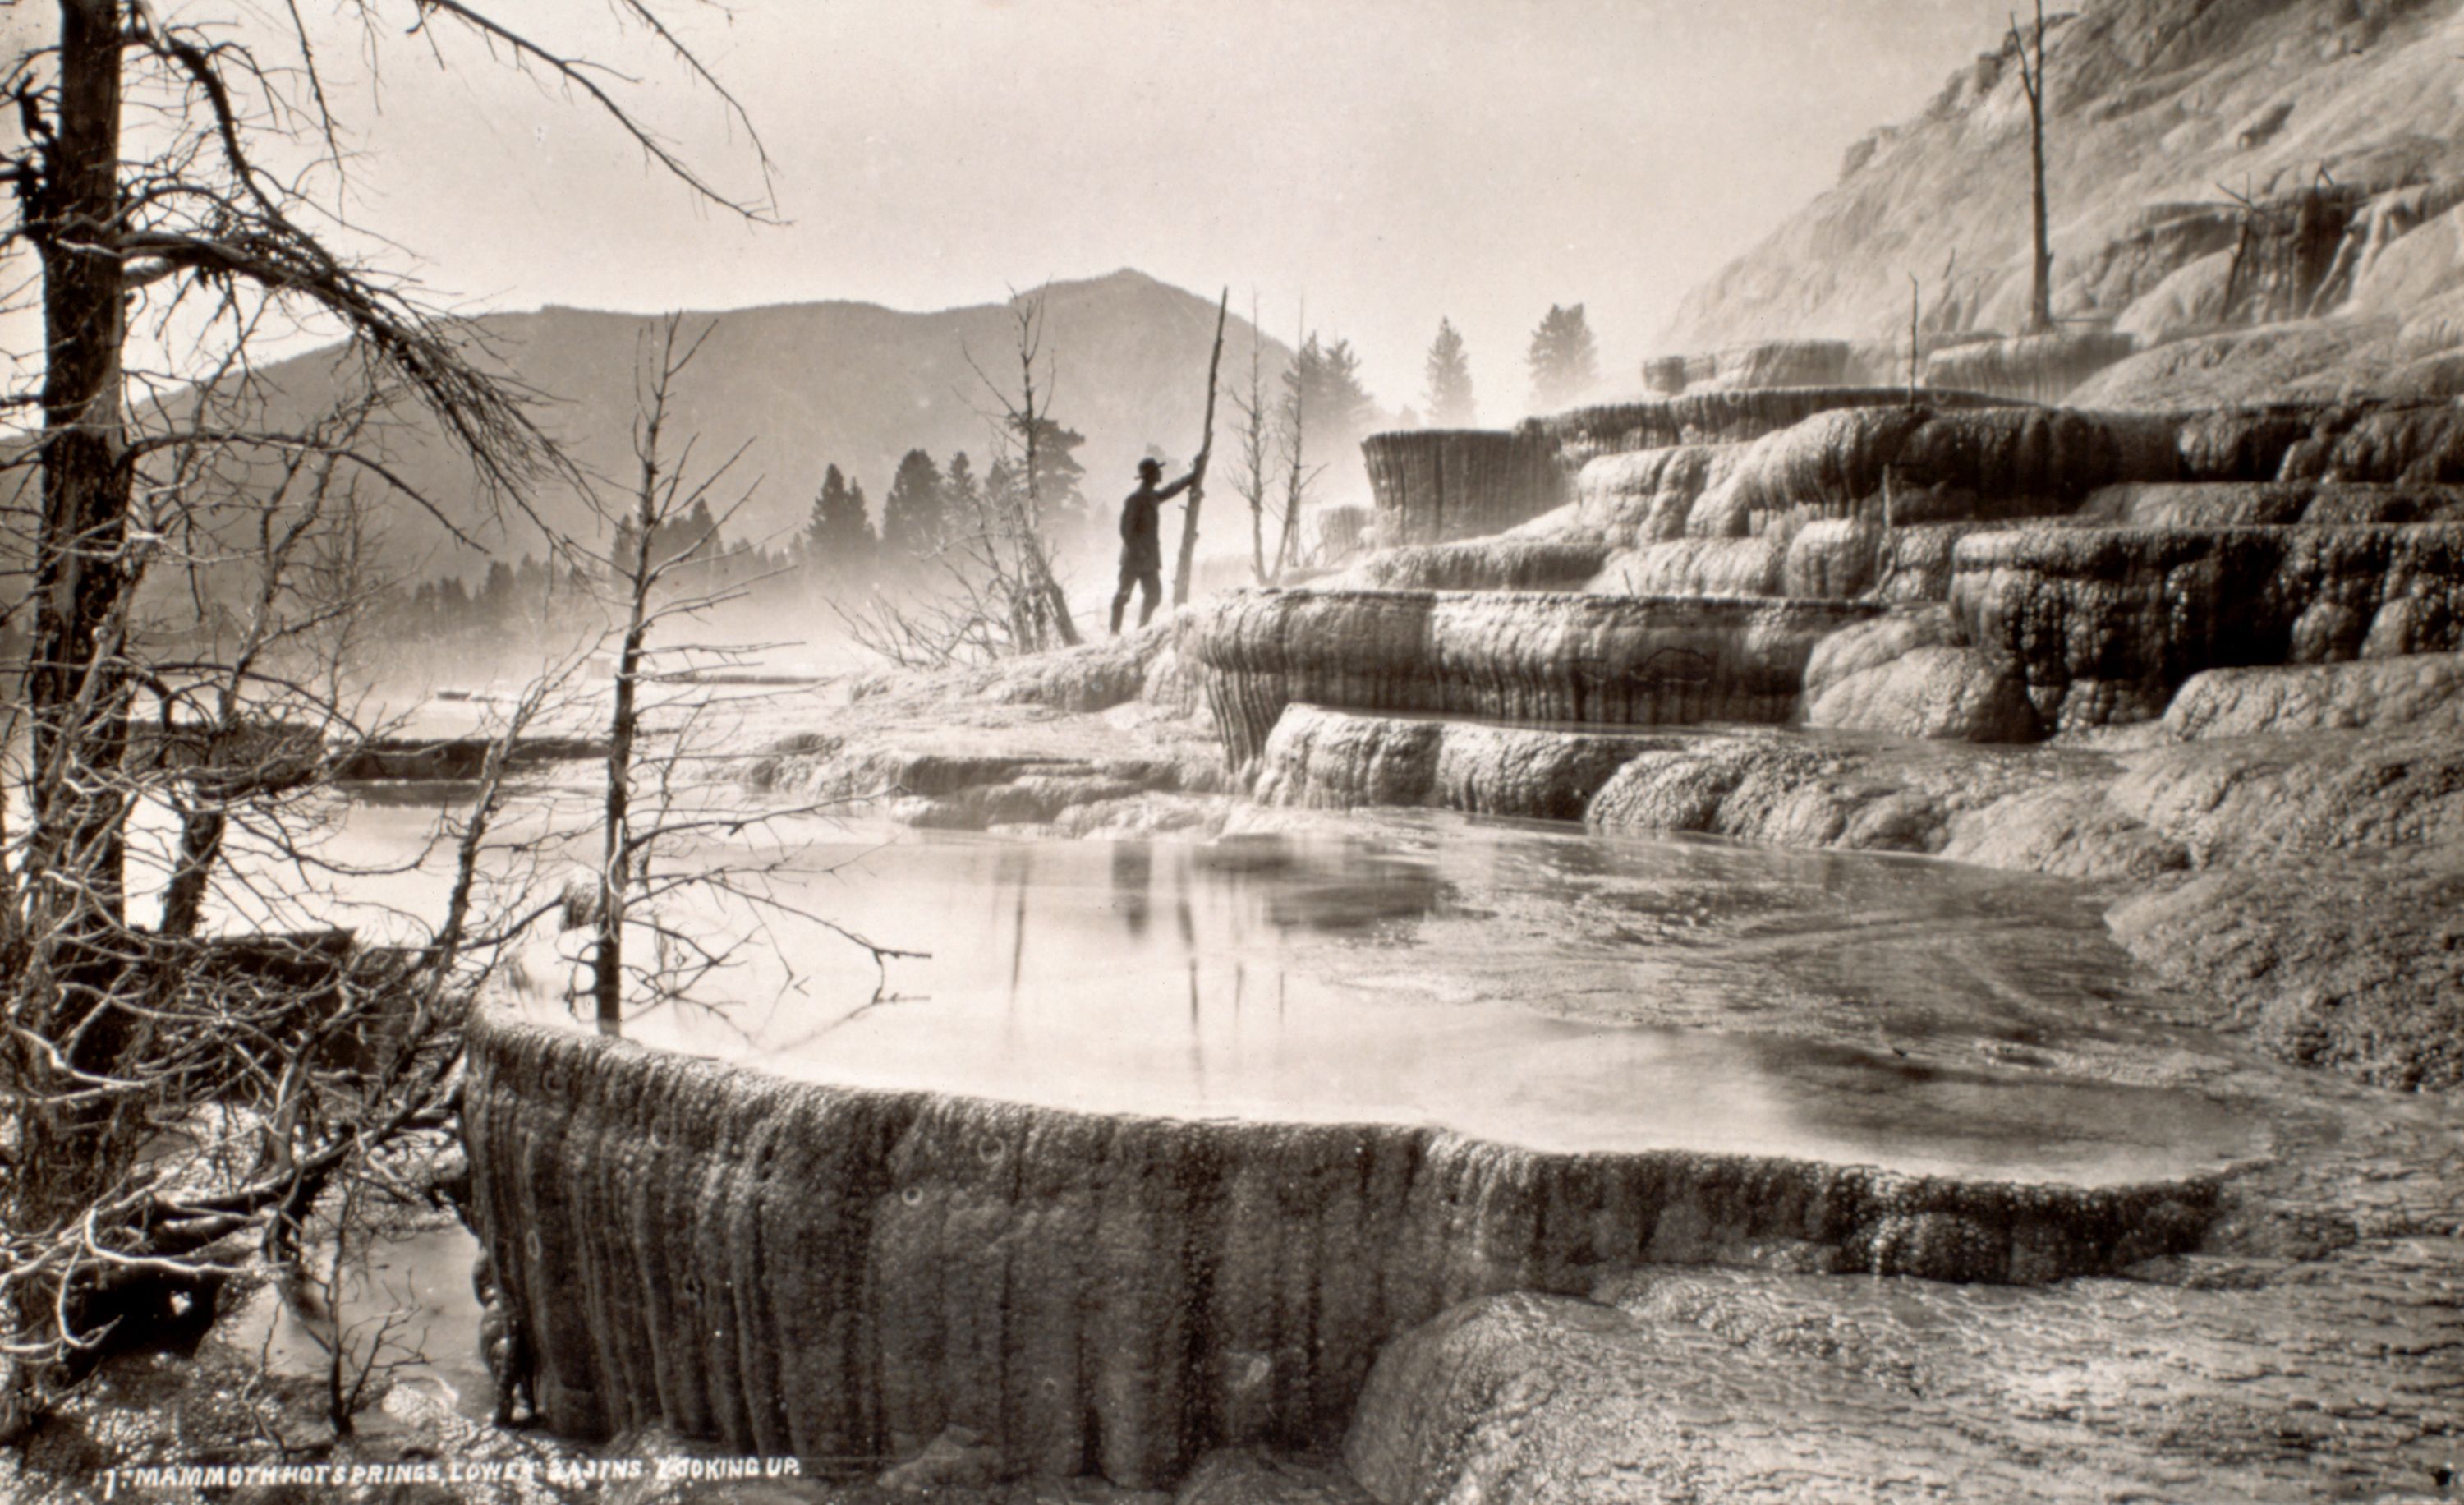 <strong>Mammoth Hot Springs:</strong> A man stands at the base of Mammoth Hot Springs circa 1869, before Yellowstone become the first national park in the United States.